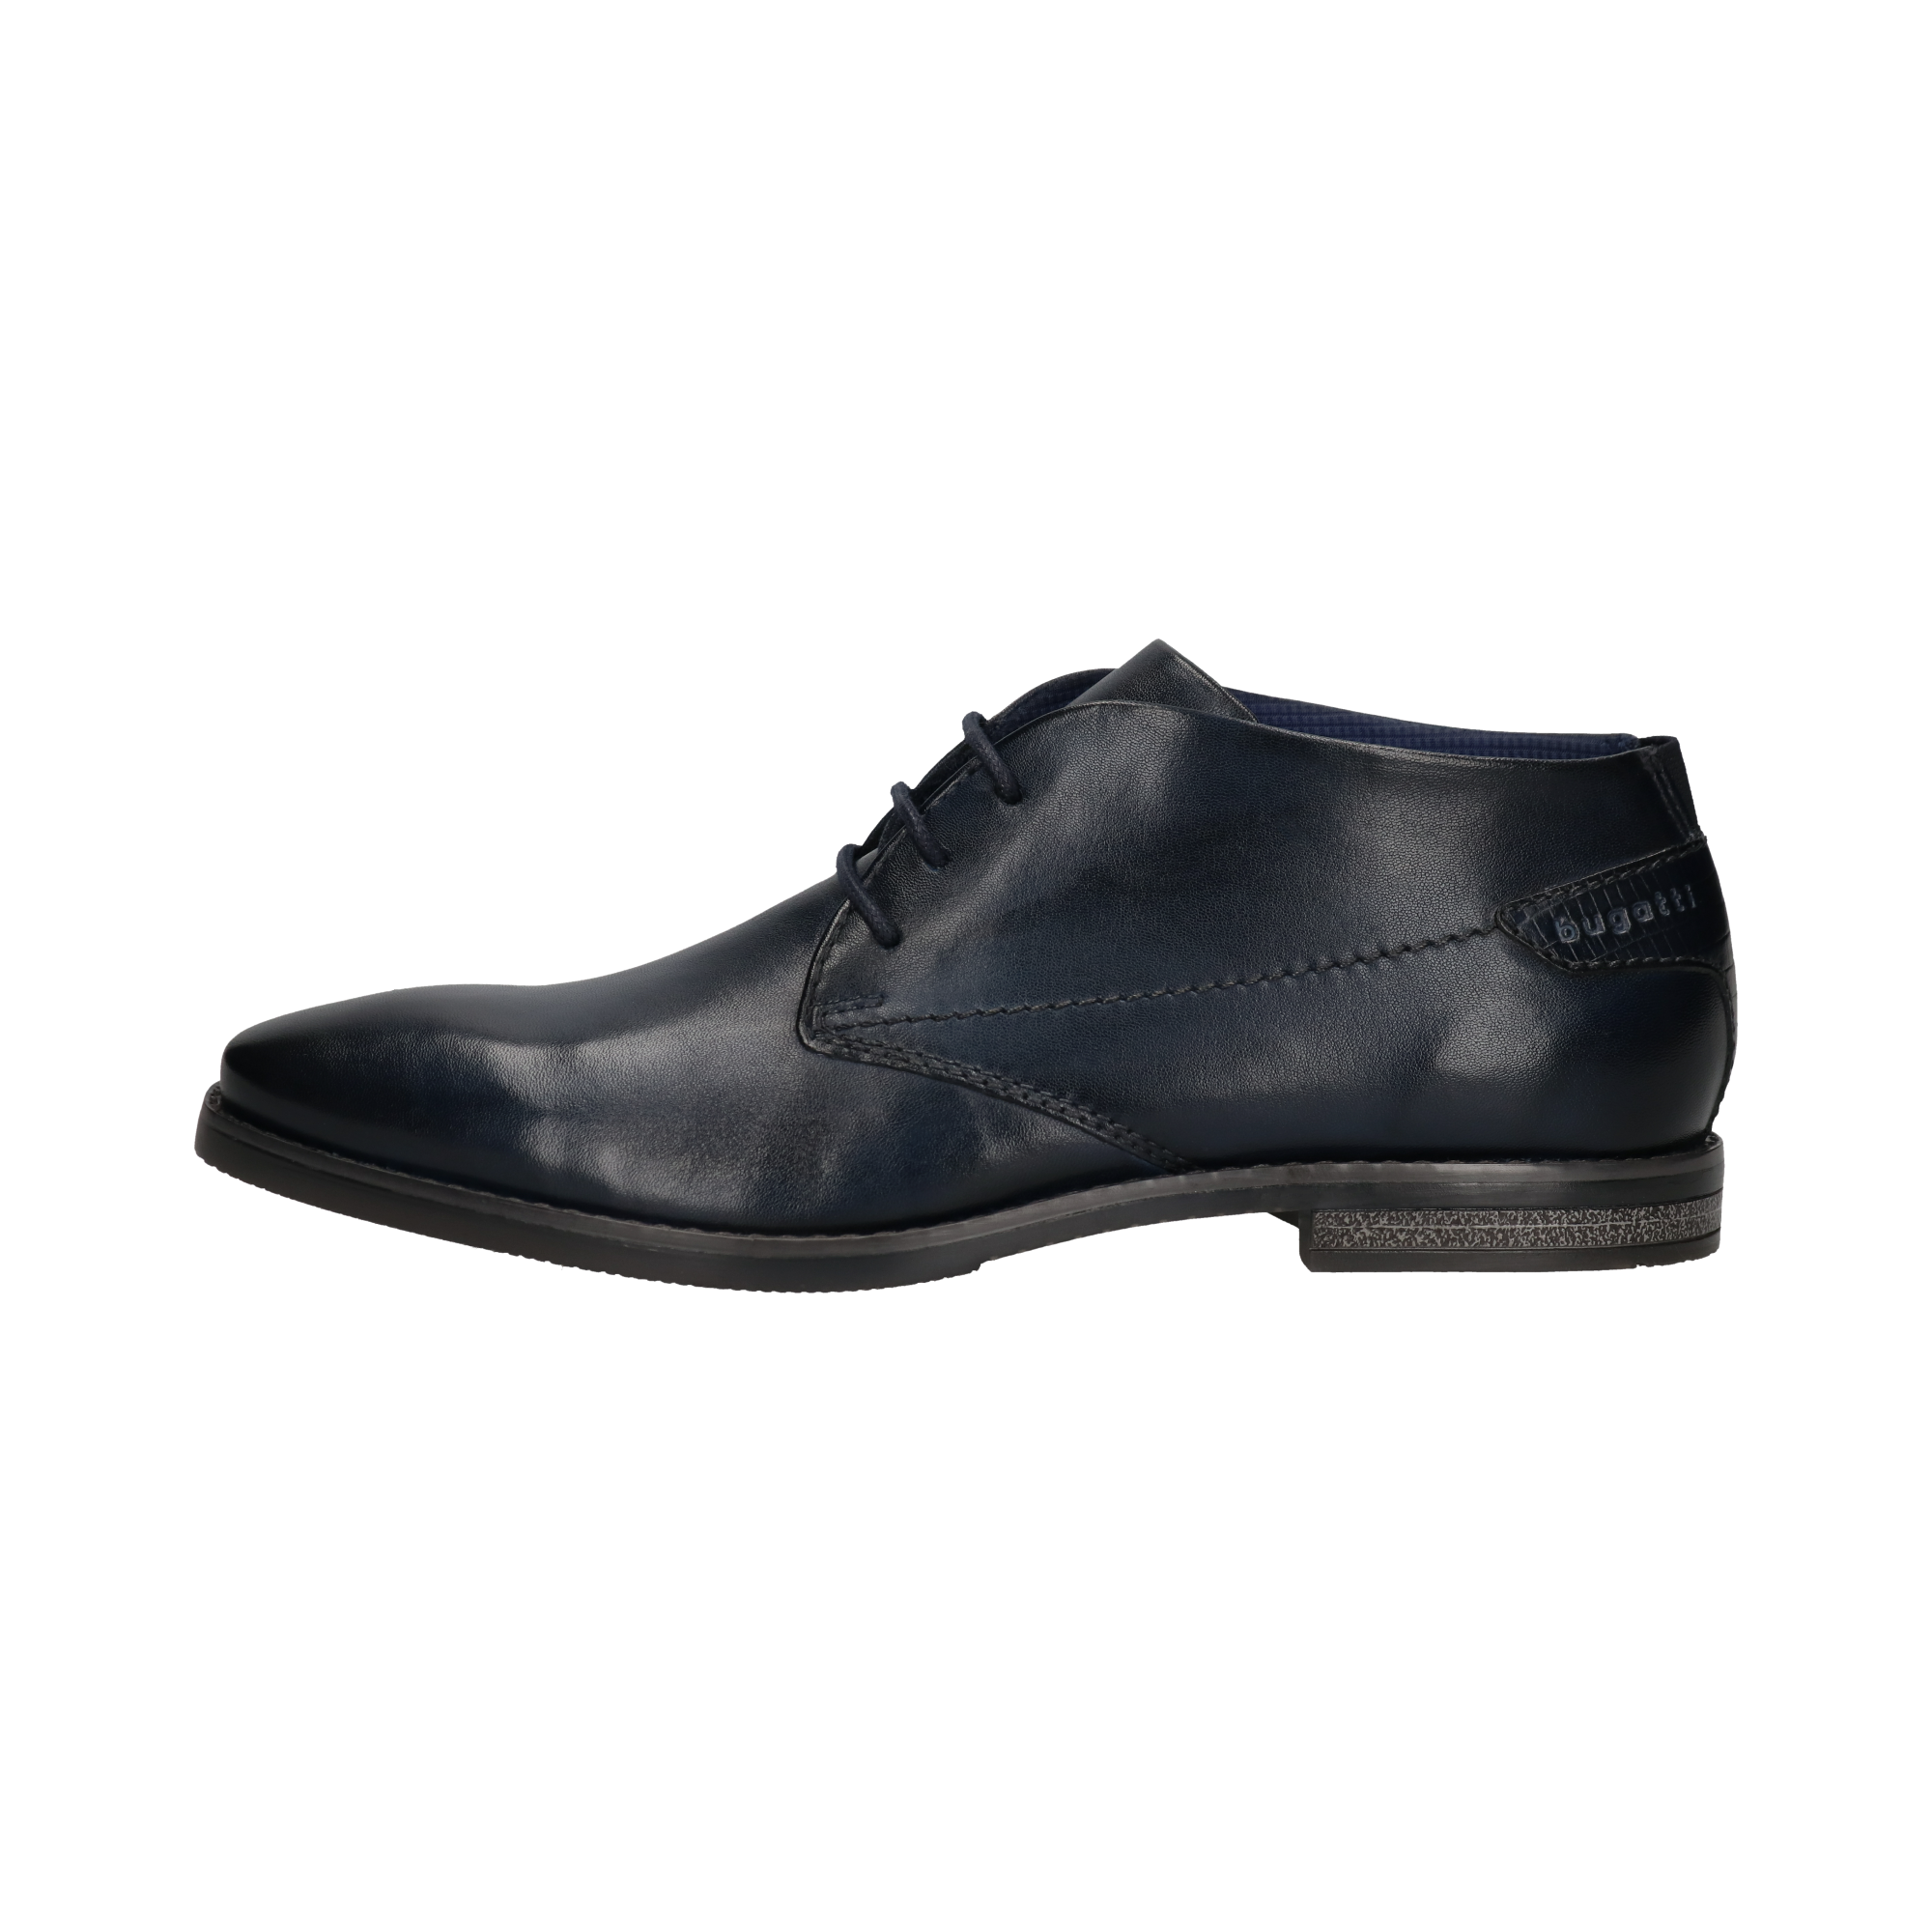 Leather Business lace-up dark blue